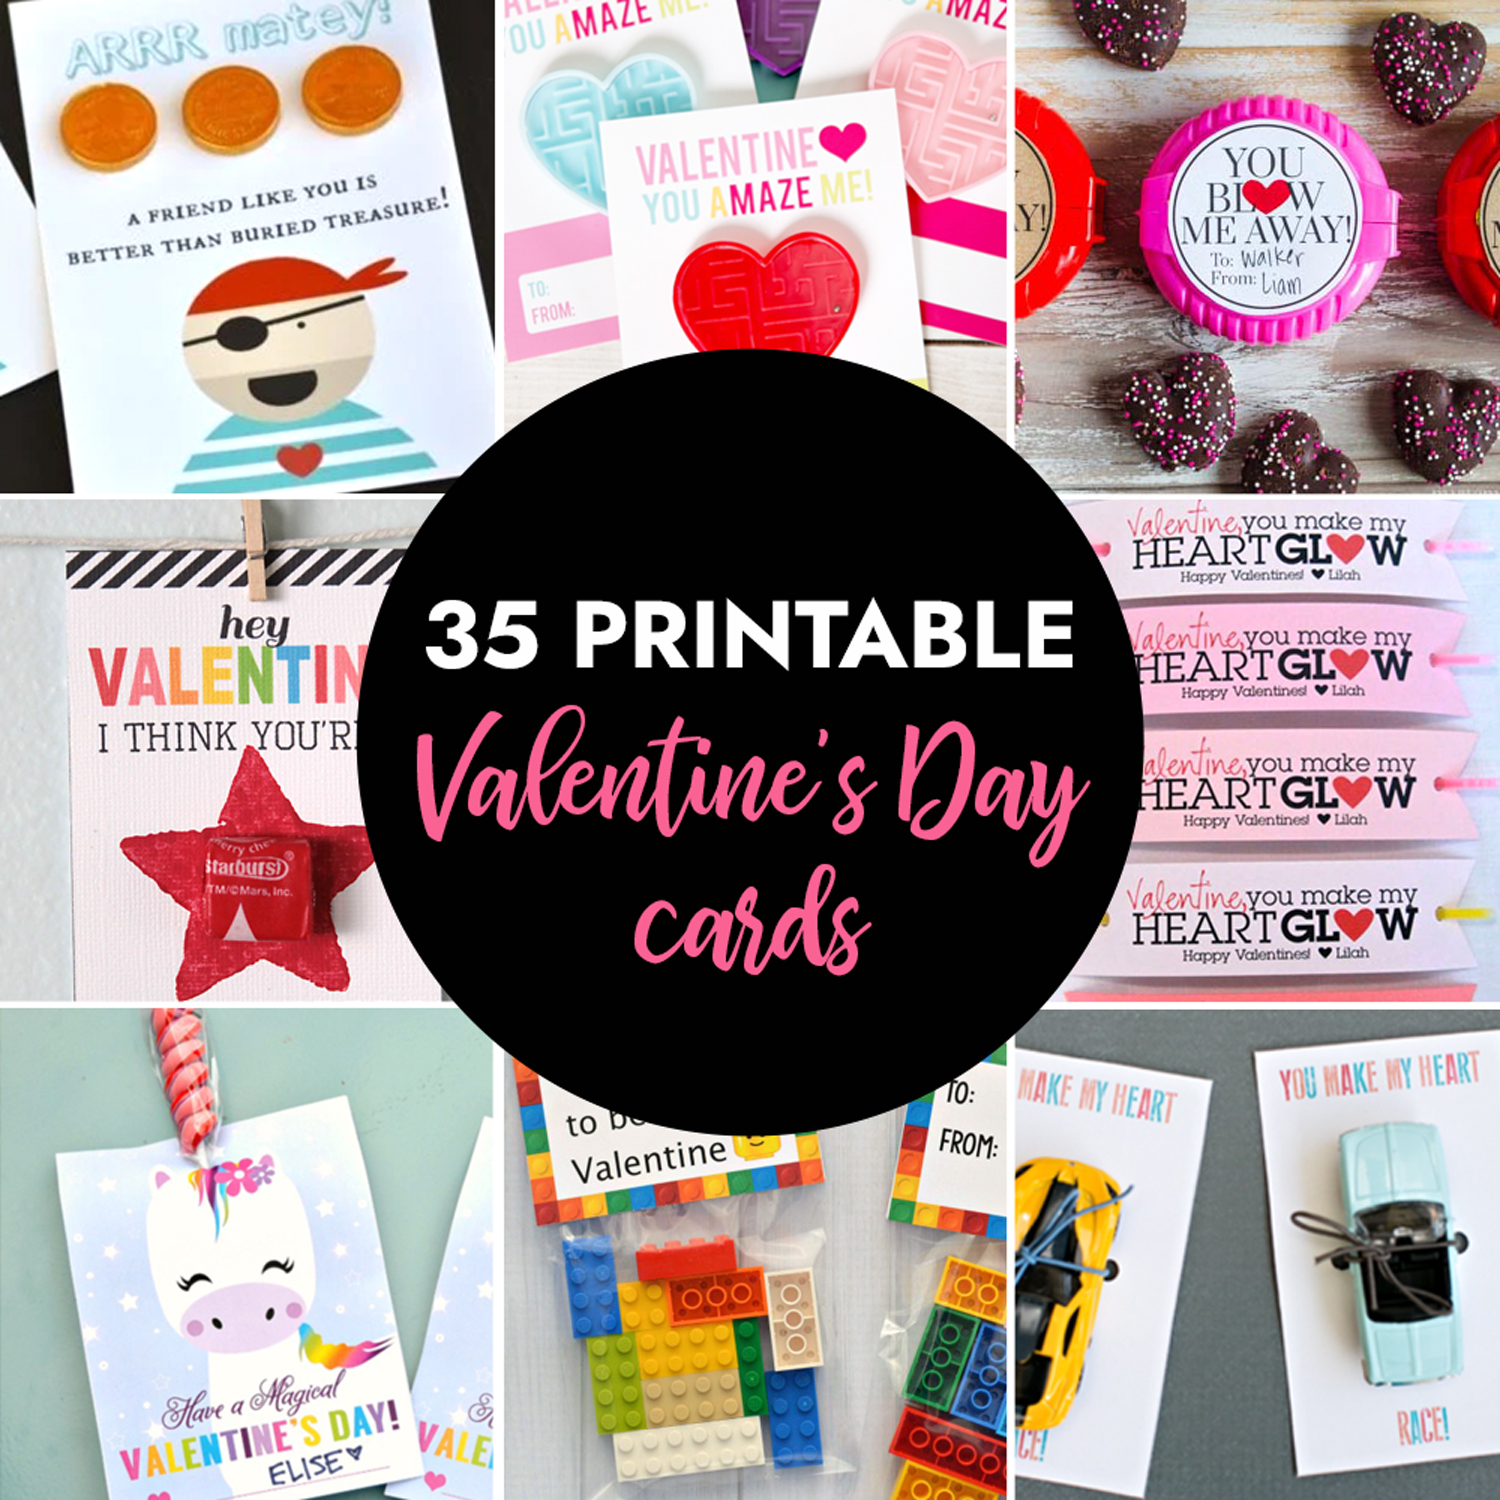 Printable Valentine Cards with Pencils - Busy Toddler